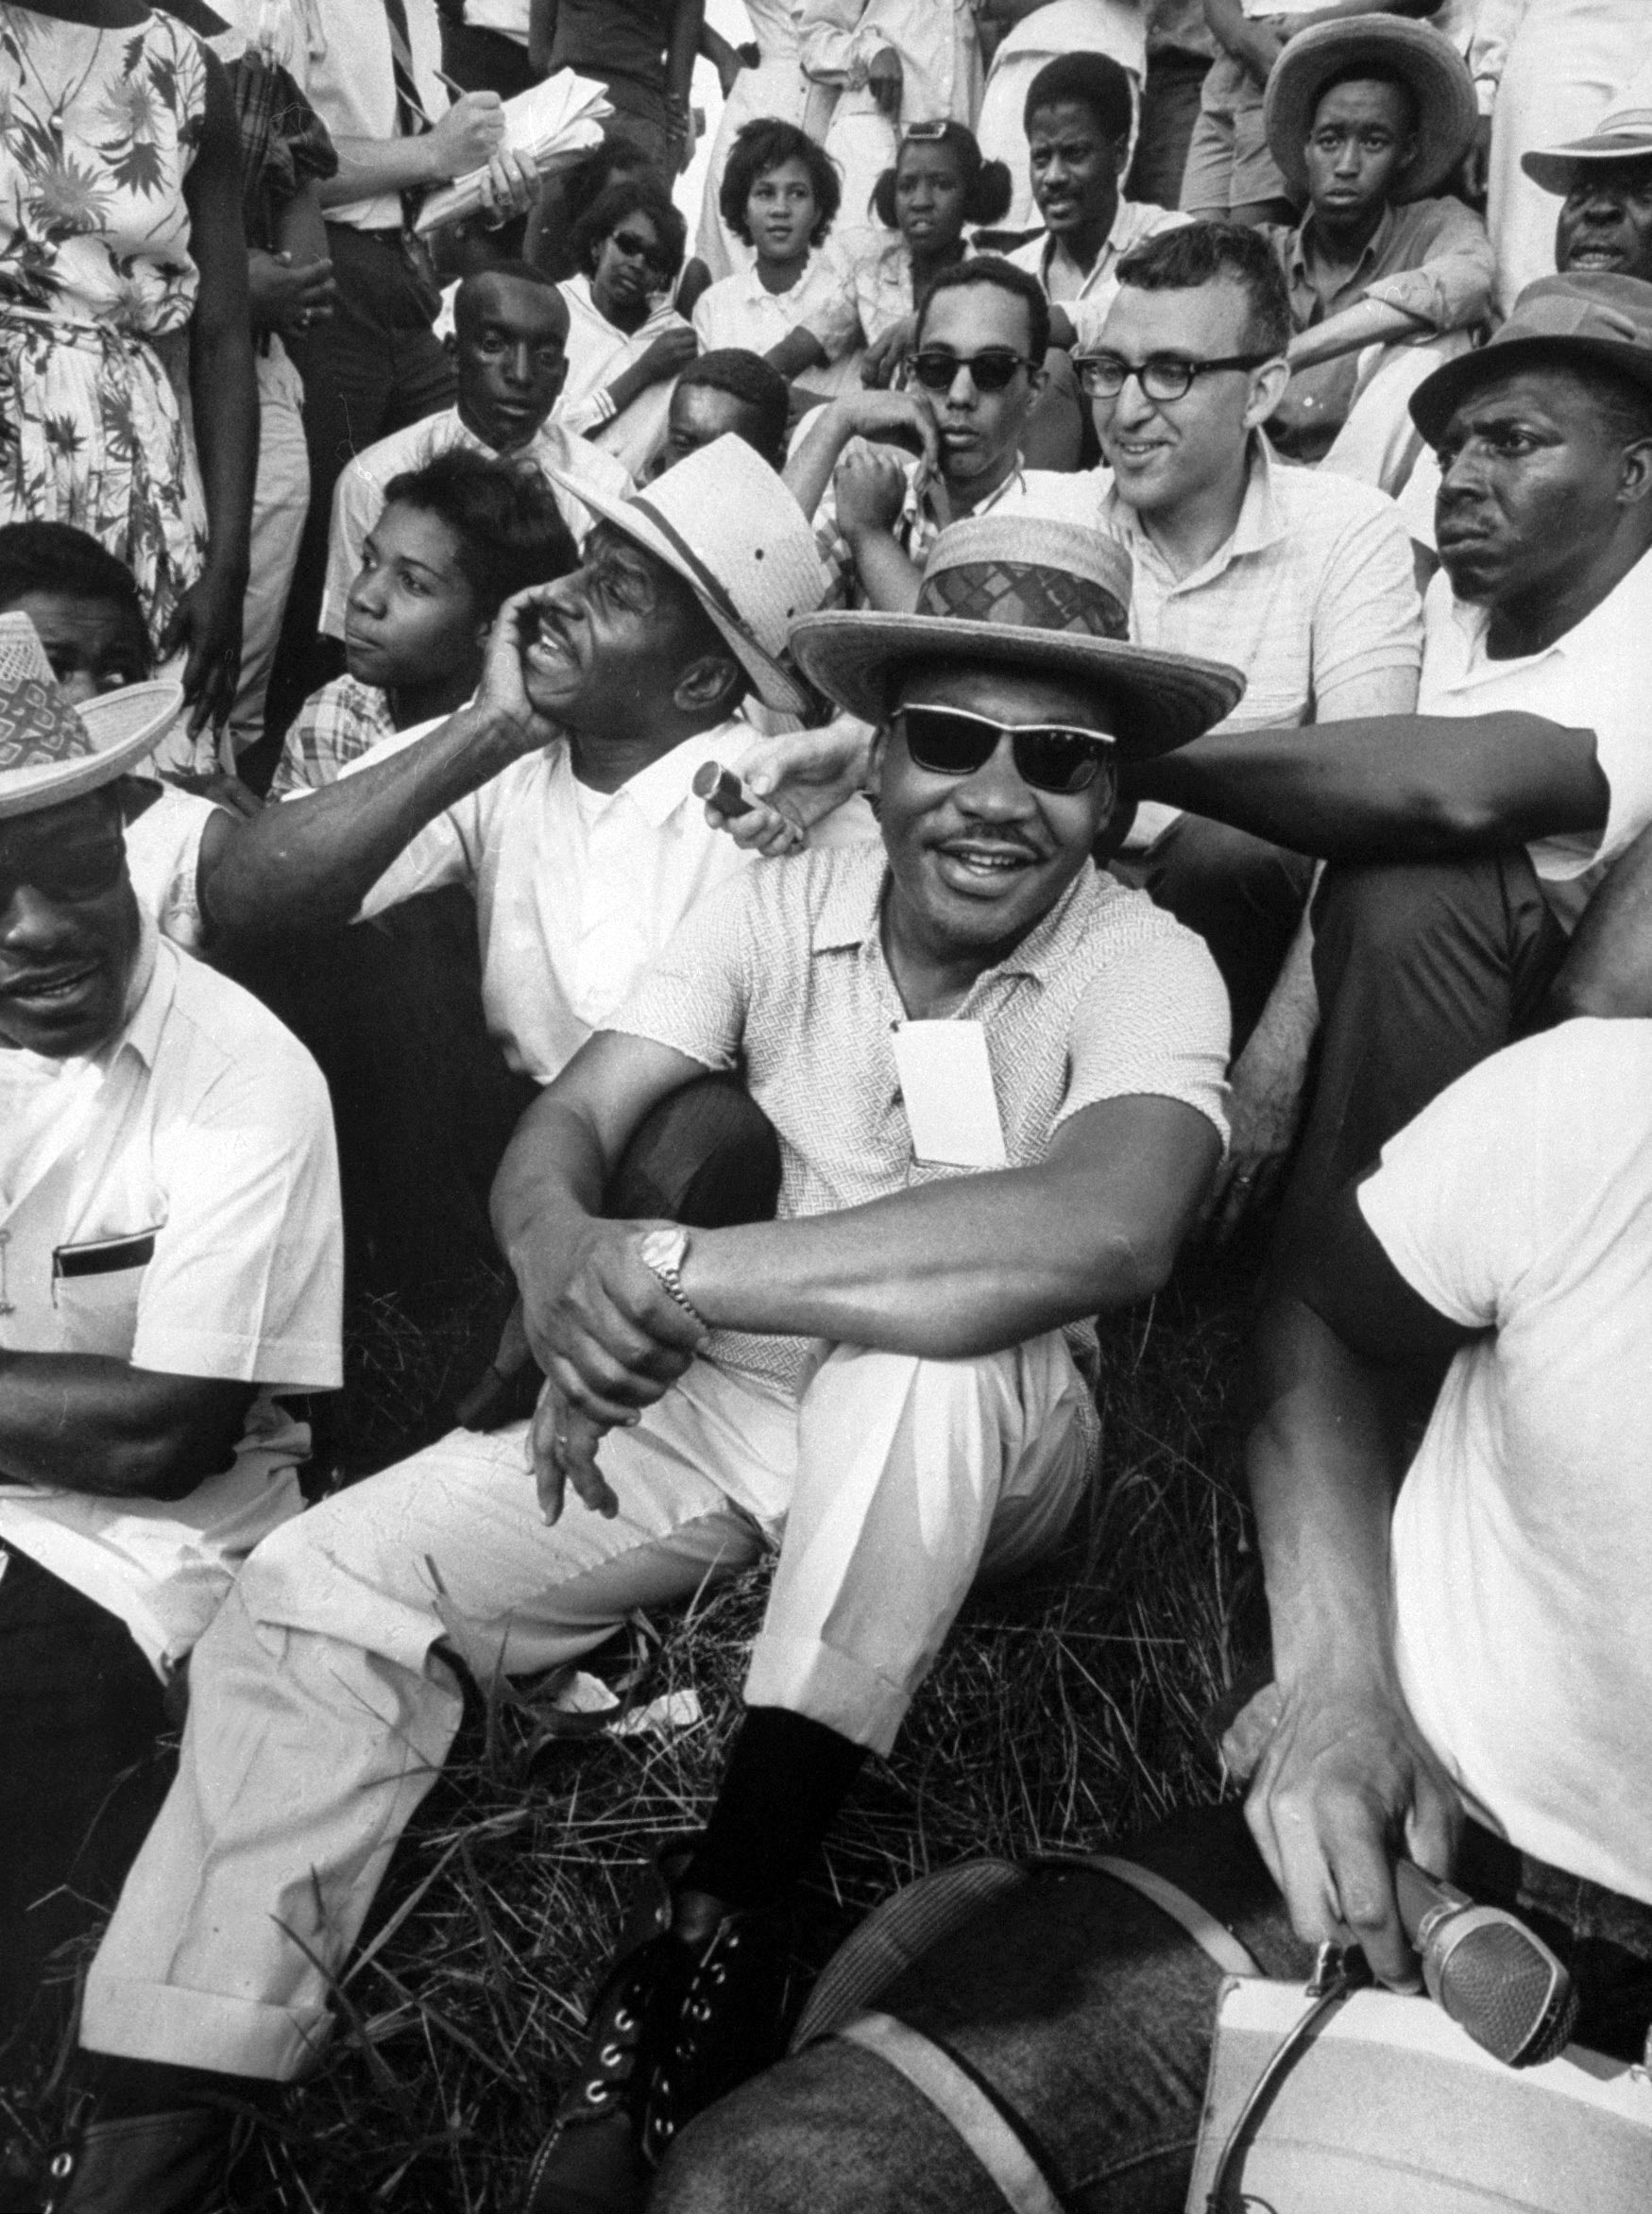 Civil rights leader Dr. Martin Luther King Jr. sitting with demonstrators who walked through Mississippi to encourage voter registration., 1966.